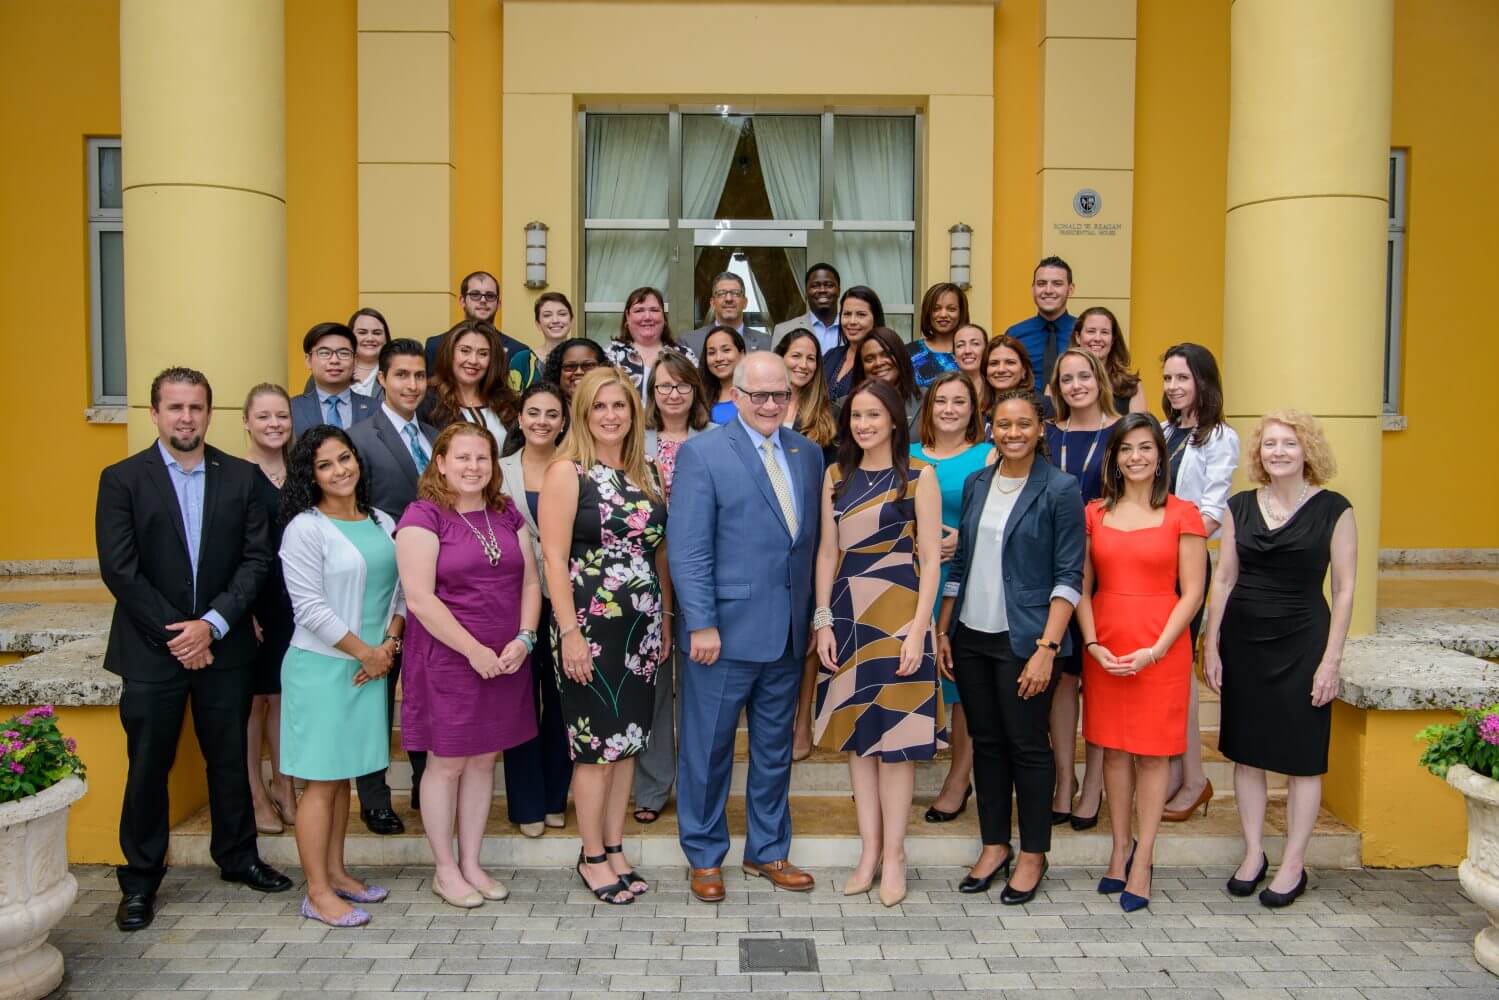 A group photo of cohort #2 of the President's leadership program standing in front of the Ronald W. Reagan Presidential House